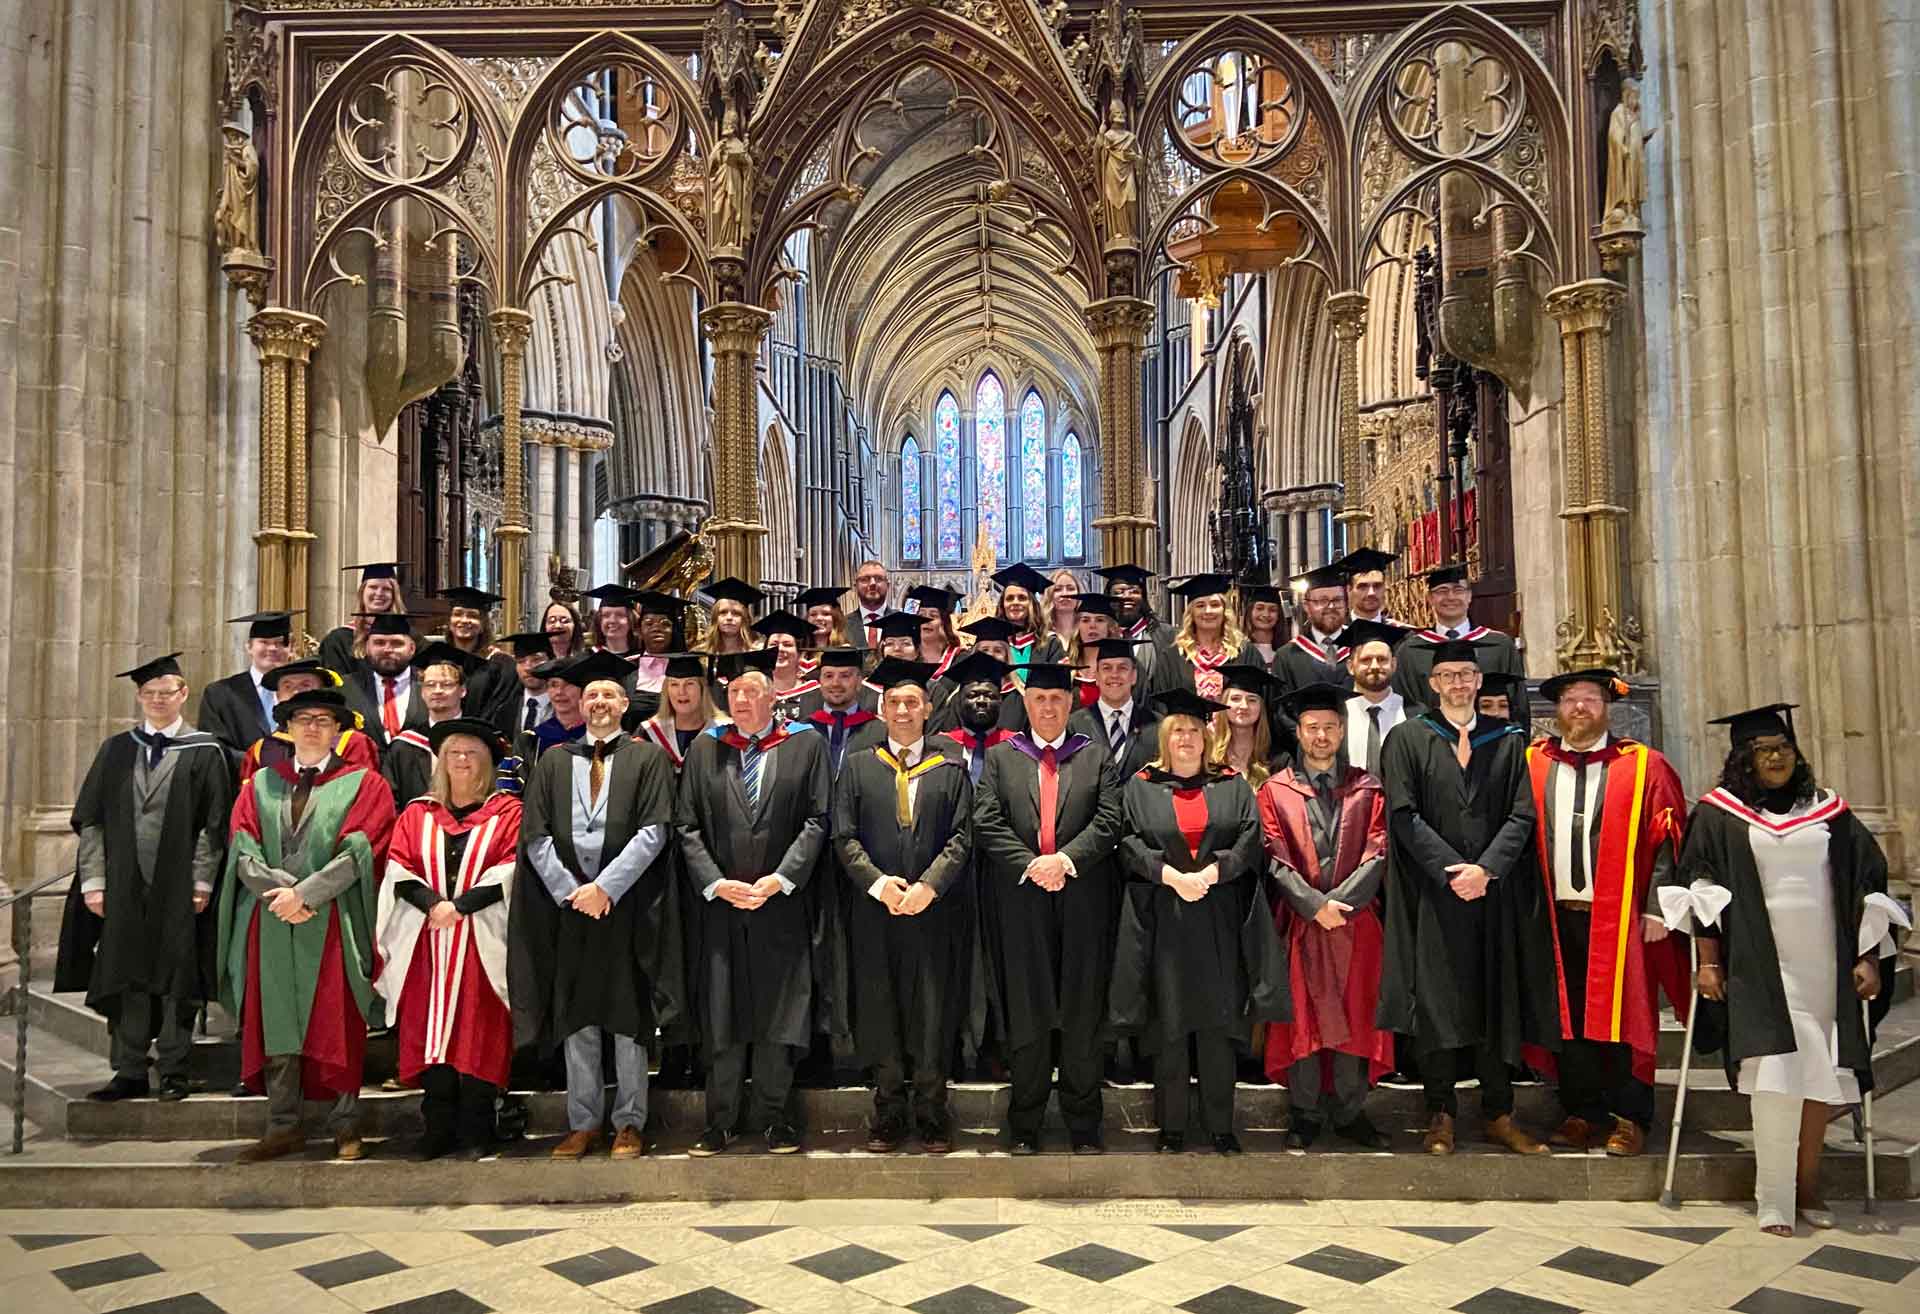 REGENTS THEOLOGICAL COLLEGE GRADUATION WORCESTER CATHEDRAL